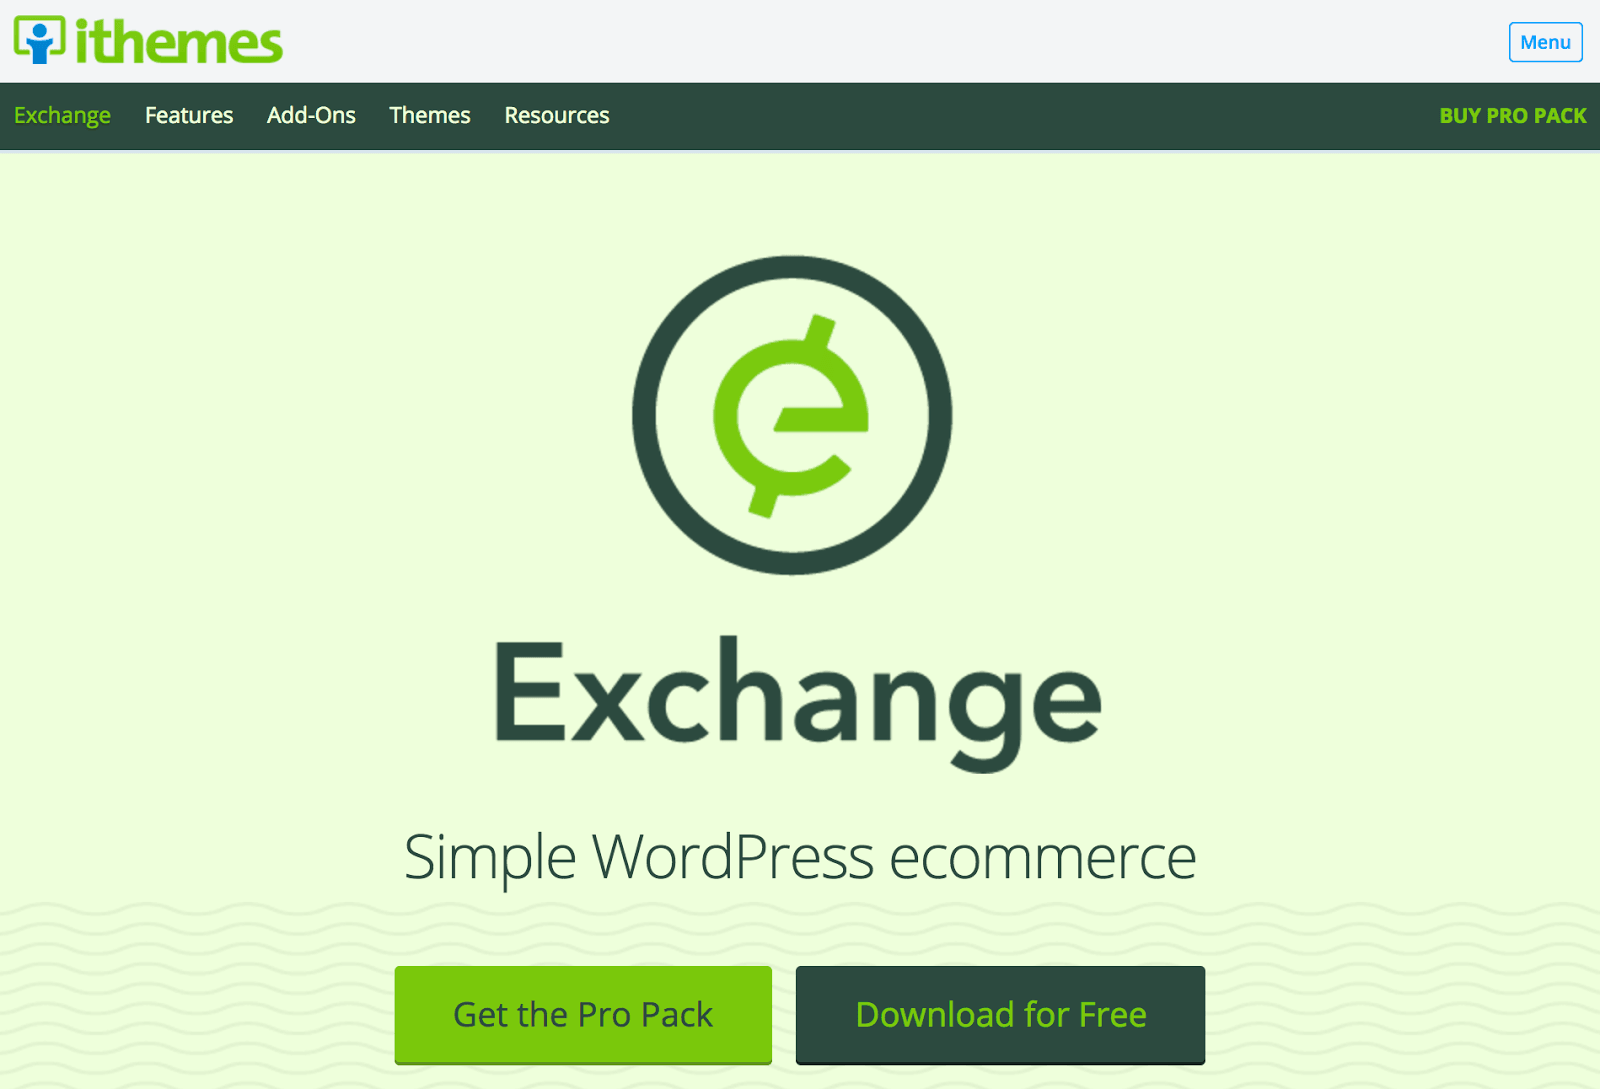 ithemes exchange as an ecommerce plugin for wordpress